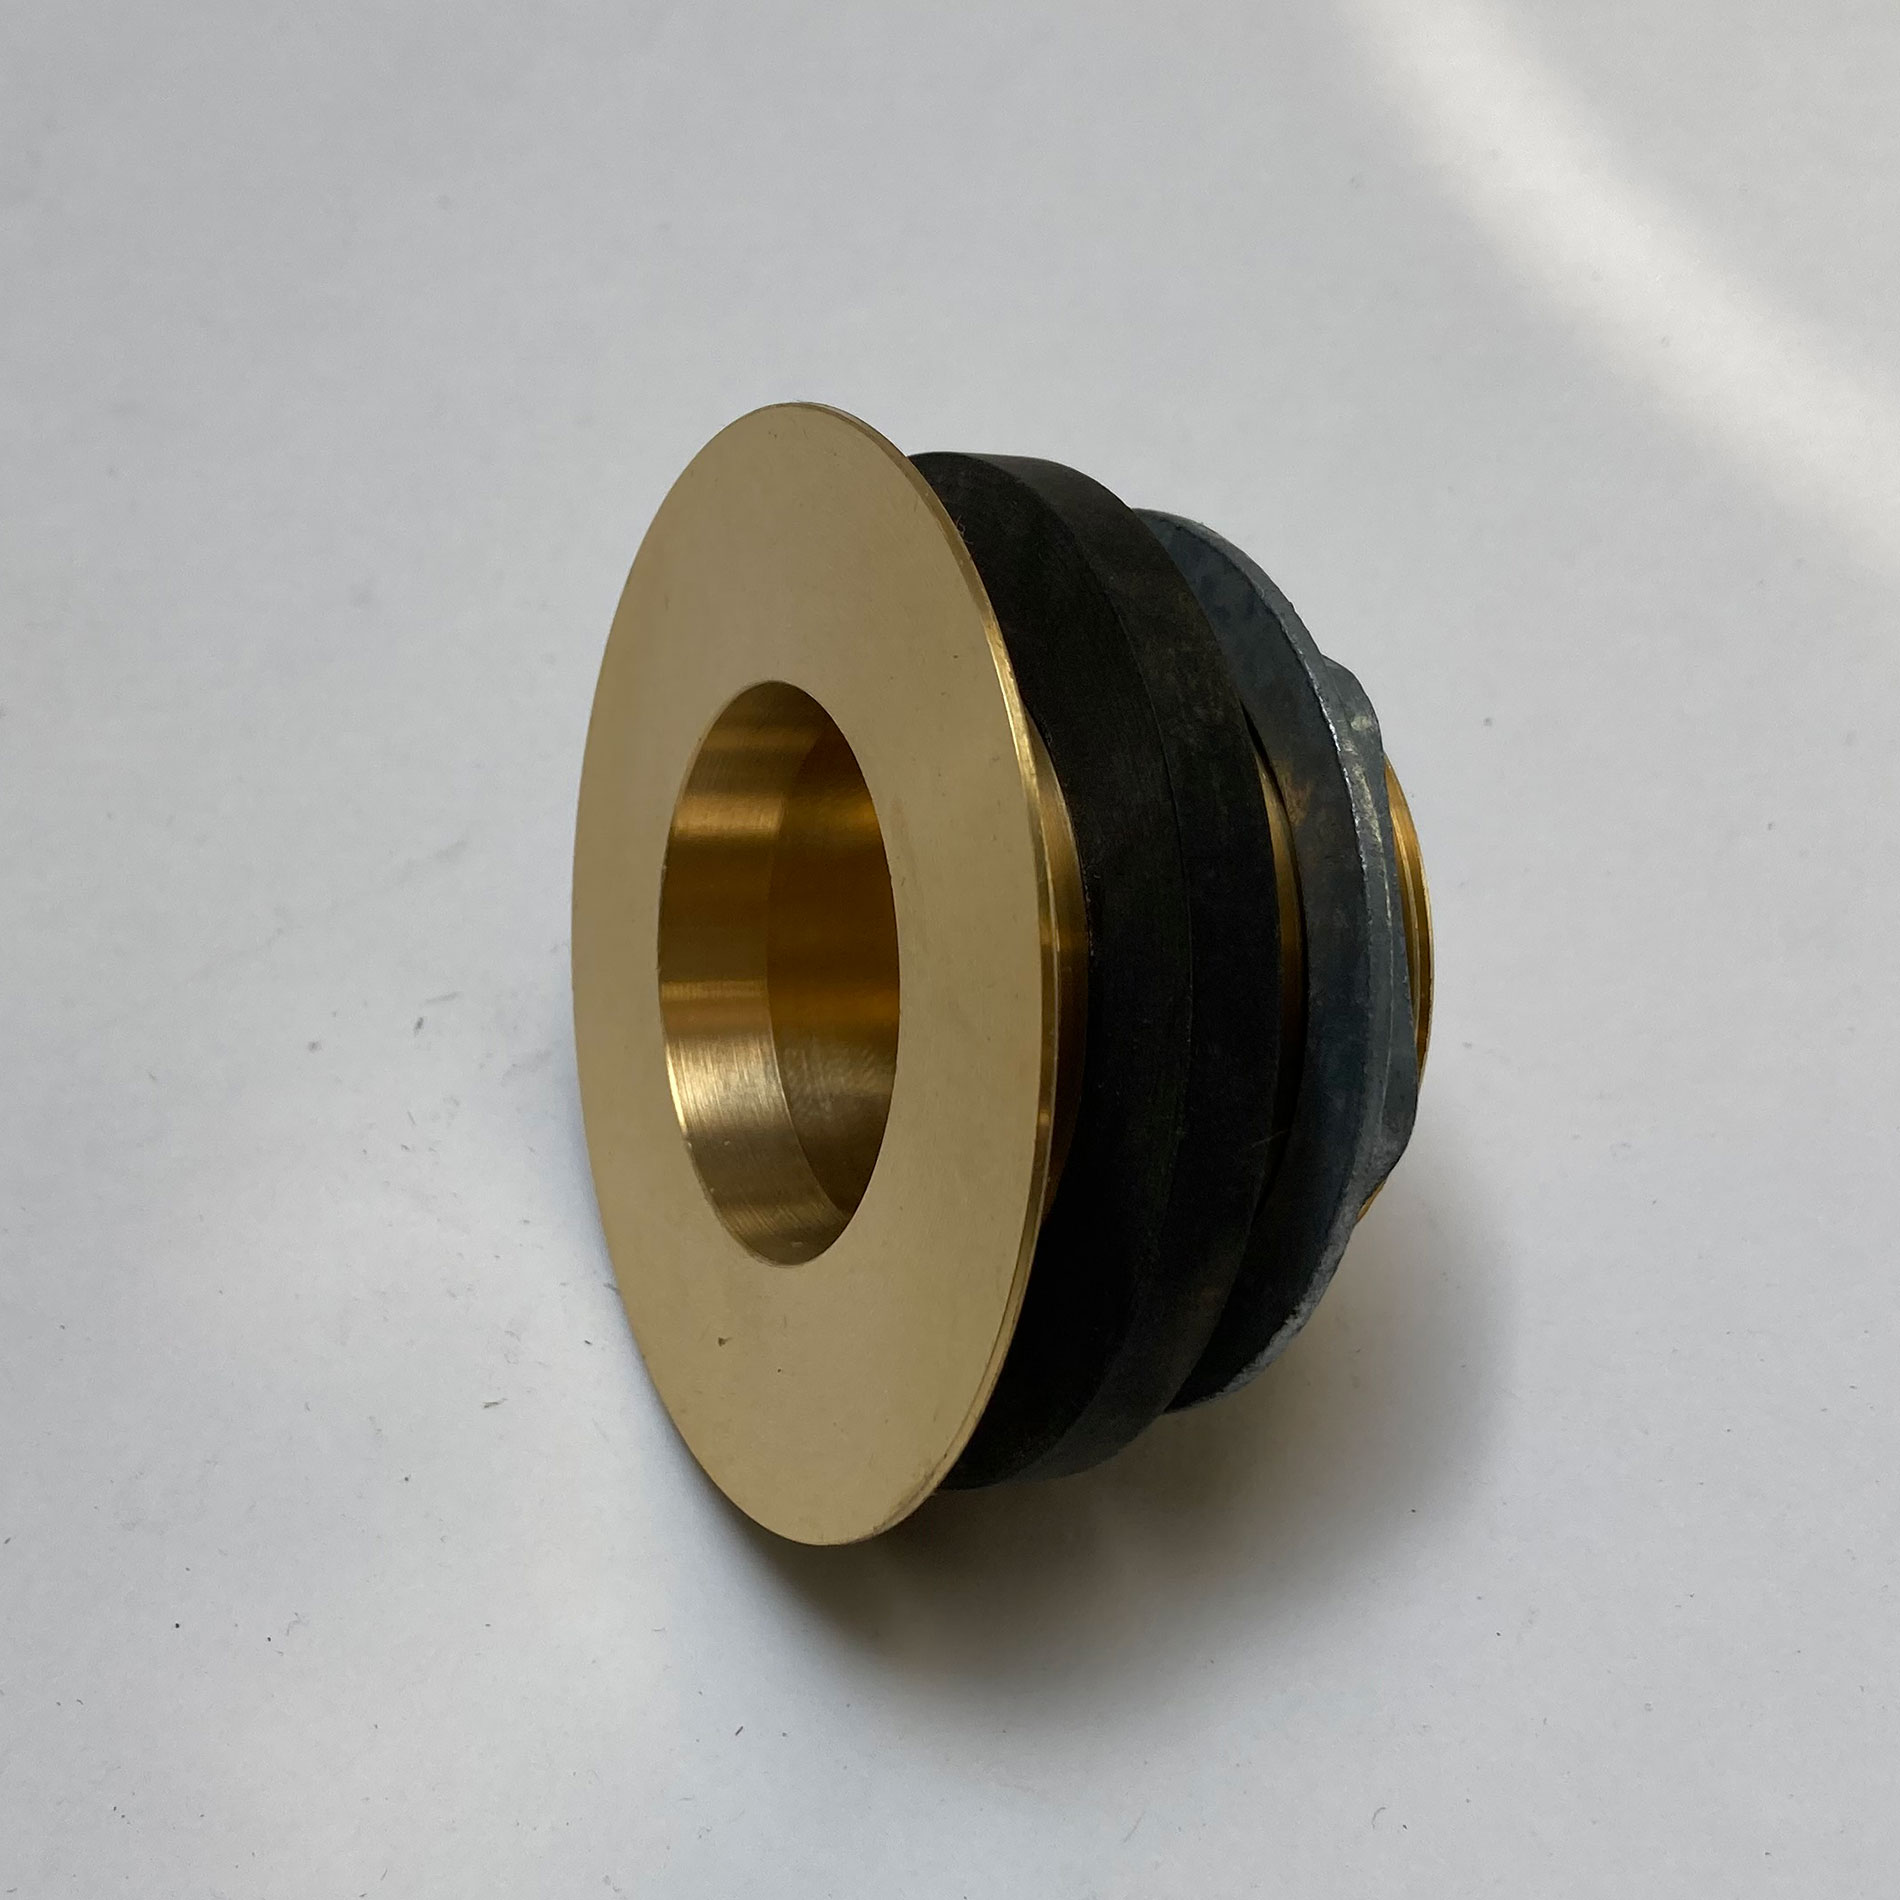 Brass Waste Drain with Locknut and Rubber Washer, #40-C-image